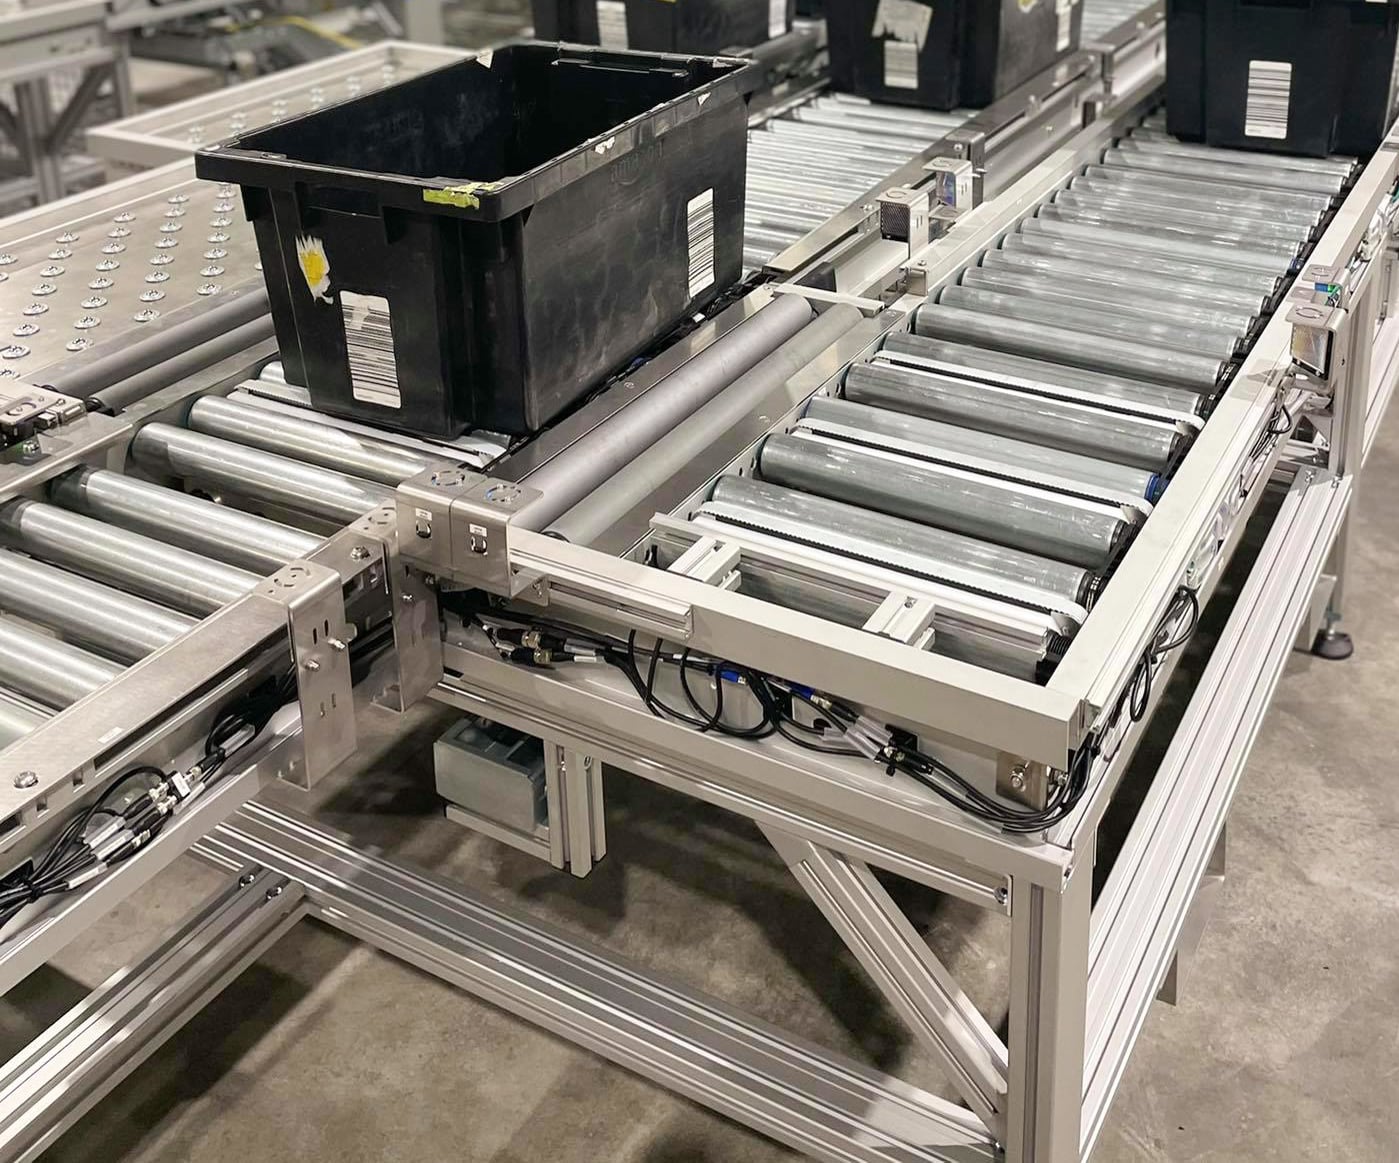 Our transfer units for roller conveyors help you transfer products from one line to another, as can be seen on the photo where a crate is being transferred.